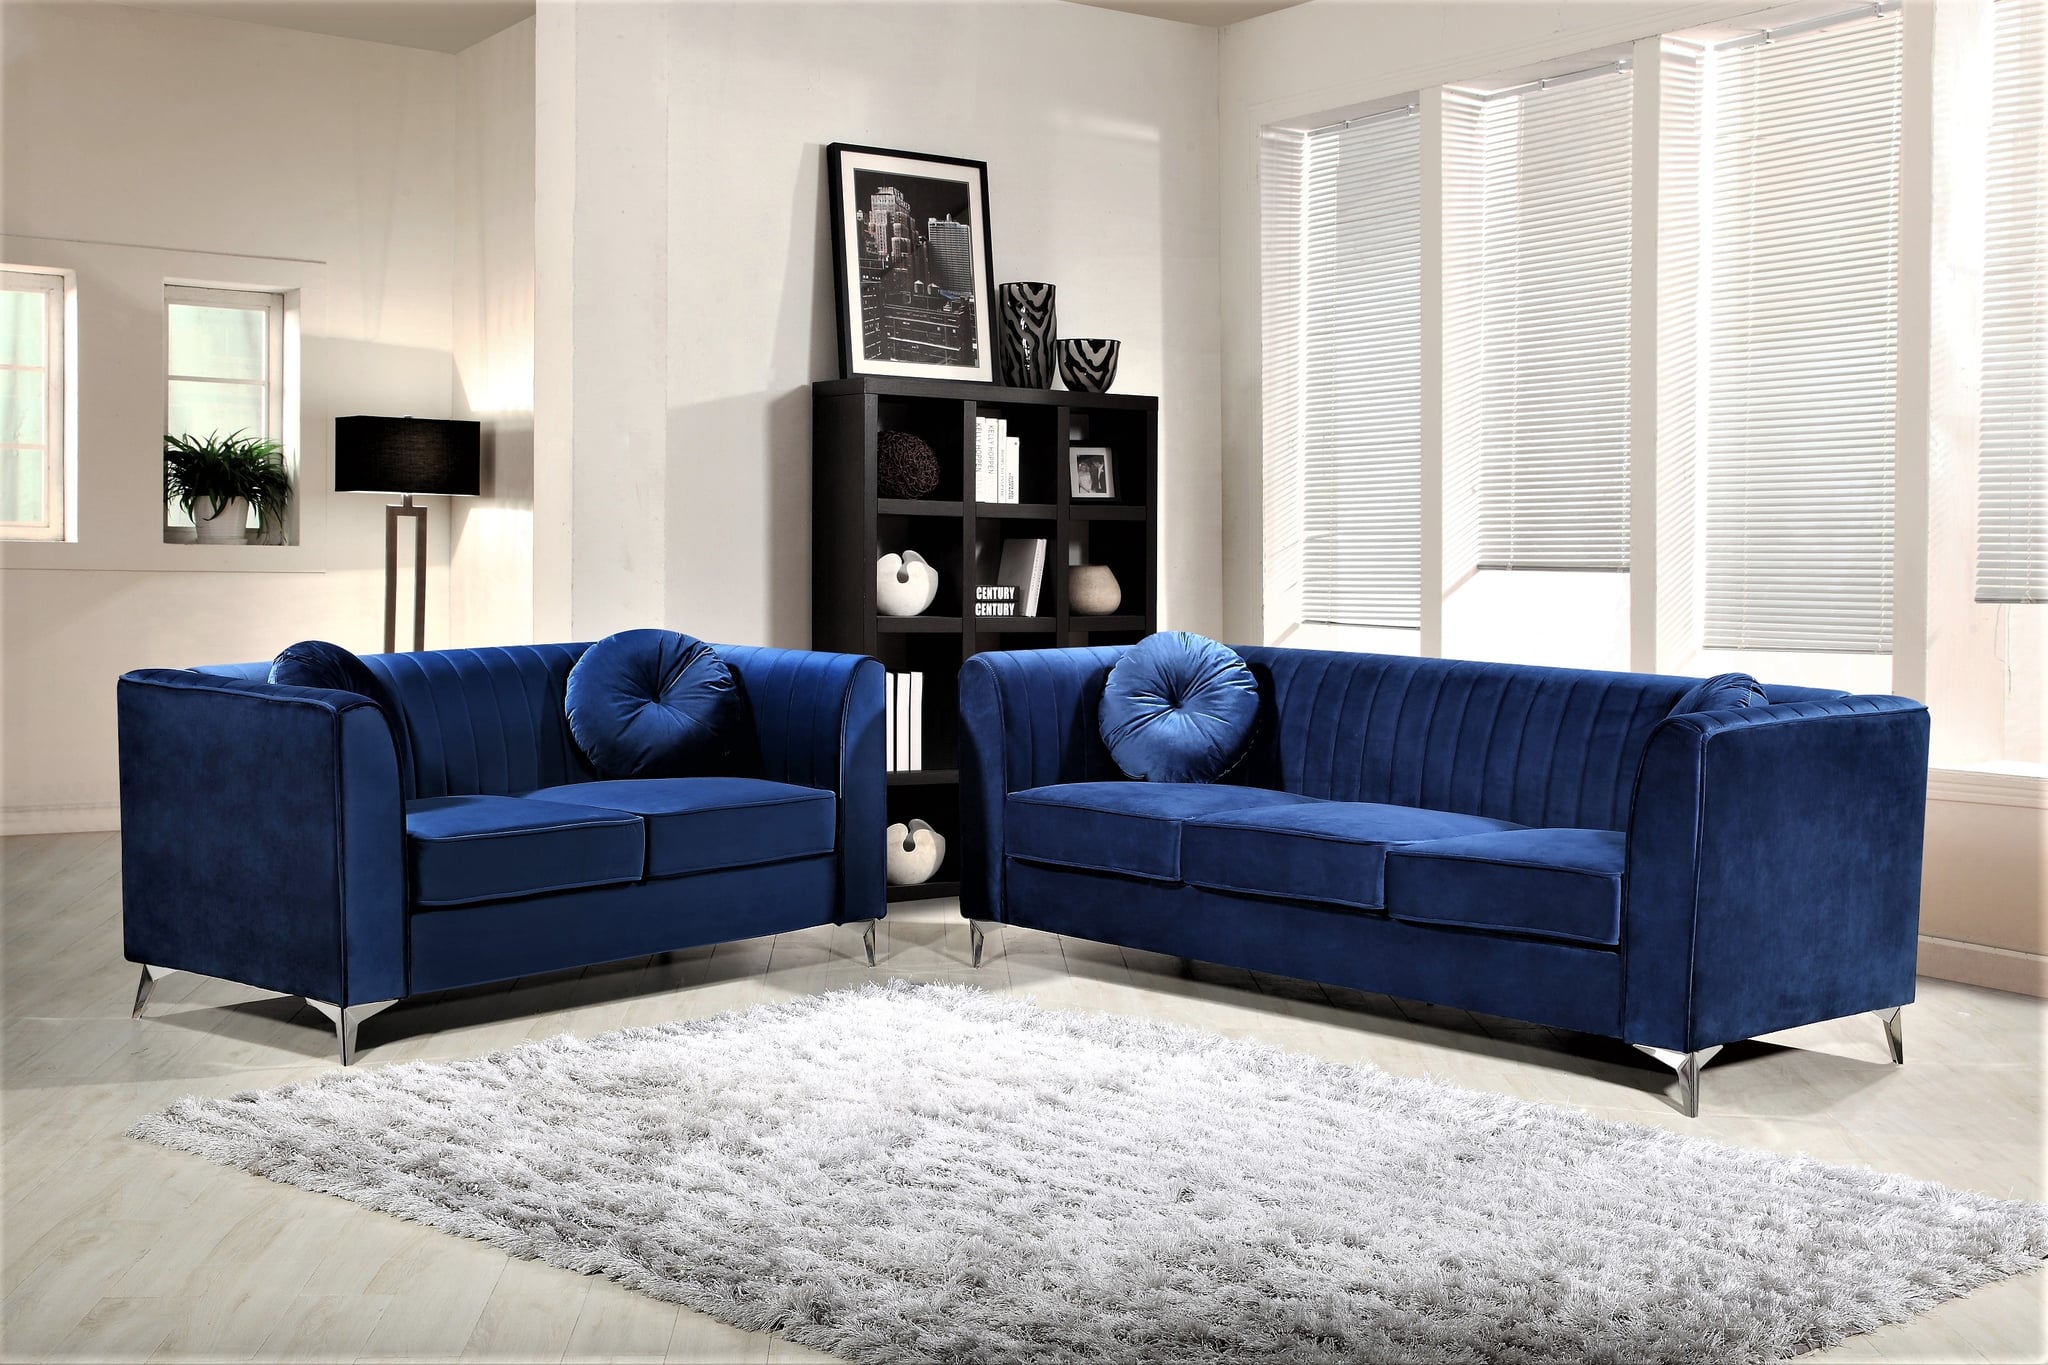 US Pride Furniture Valak 2 Piece Velvet Living Room Set Sofa Shopping Made Easy These 12 Living Room Sets Are Exactly What You Need POPSUGAR Home Photo 11